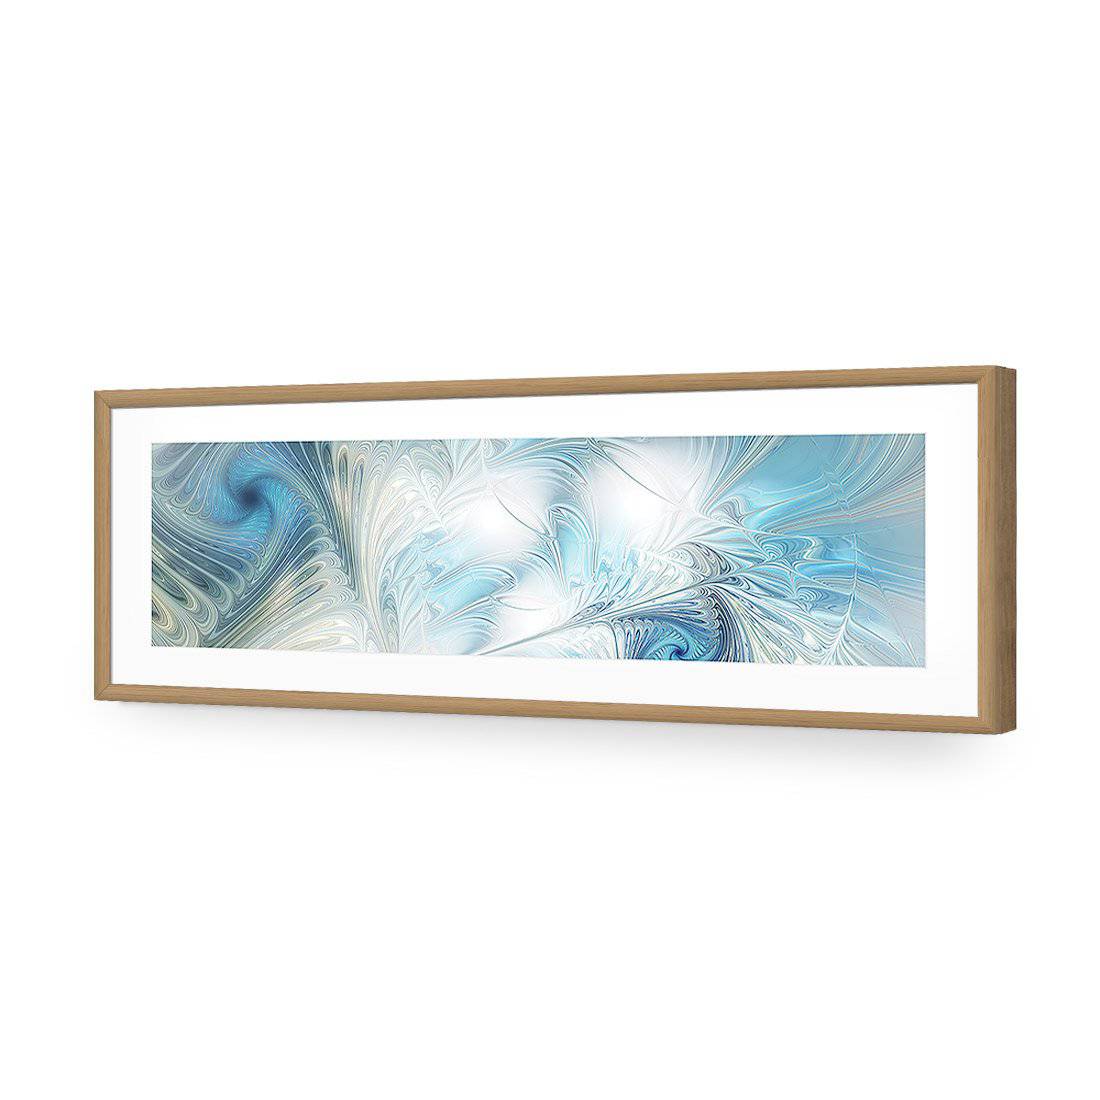 Travesty, Long-Acrylic-Wall Art Design-With Border-Acrylic - Oak Frame-60x20cm-Wall Art Designs